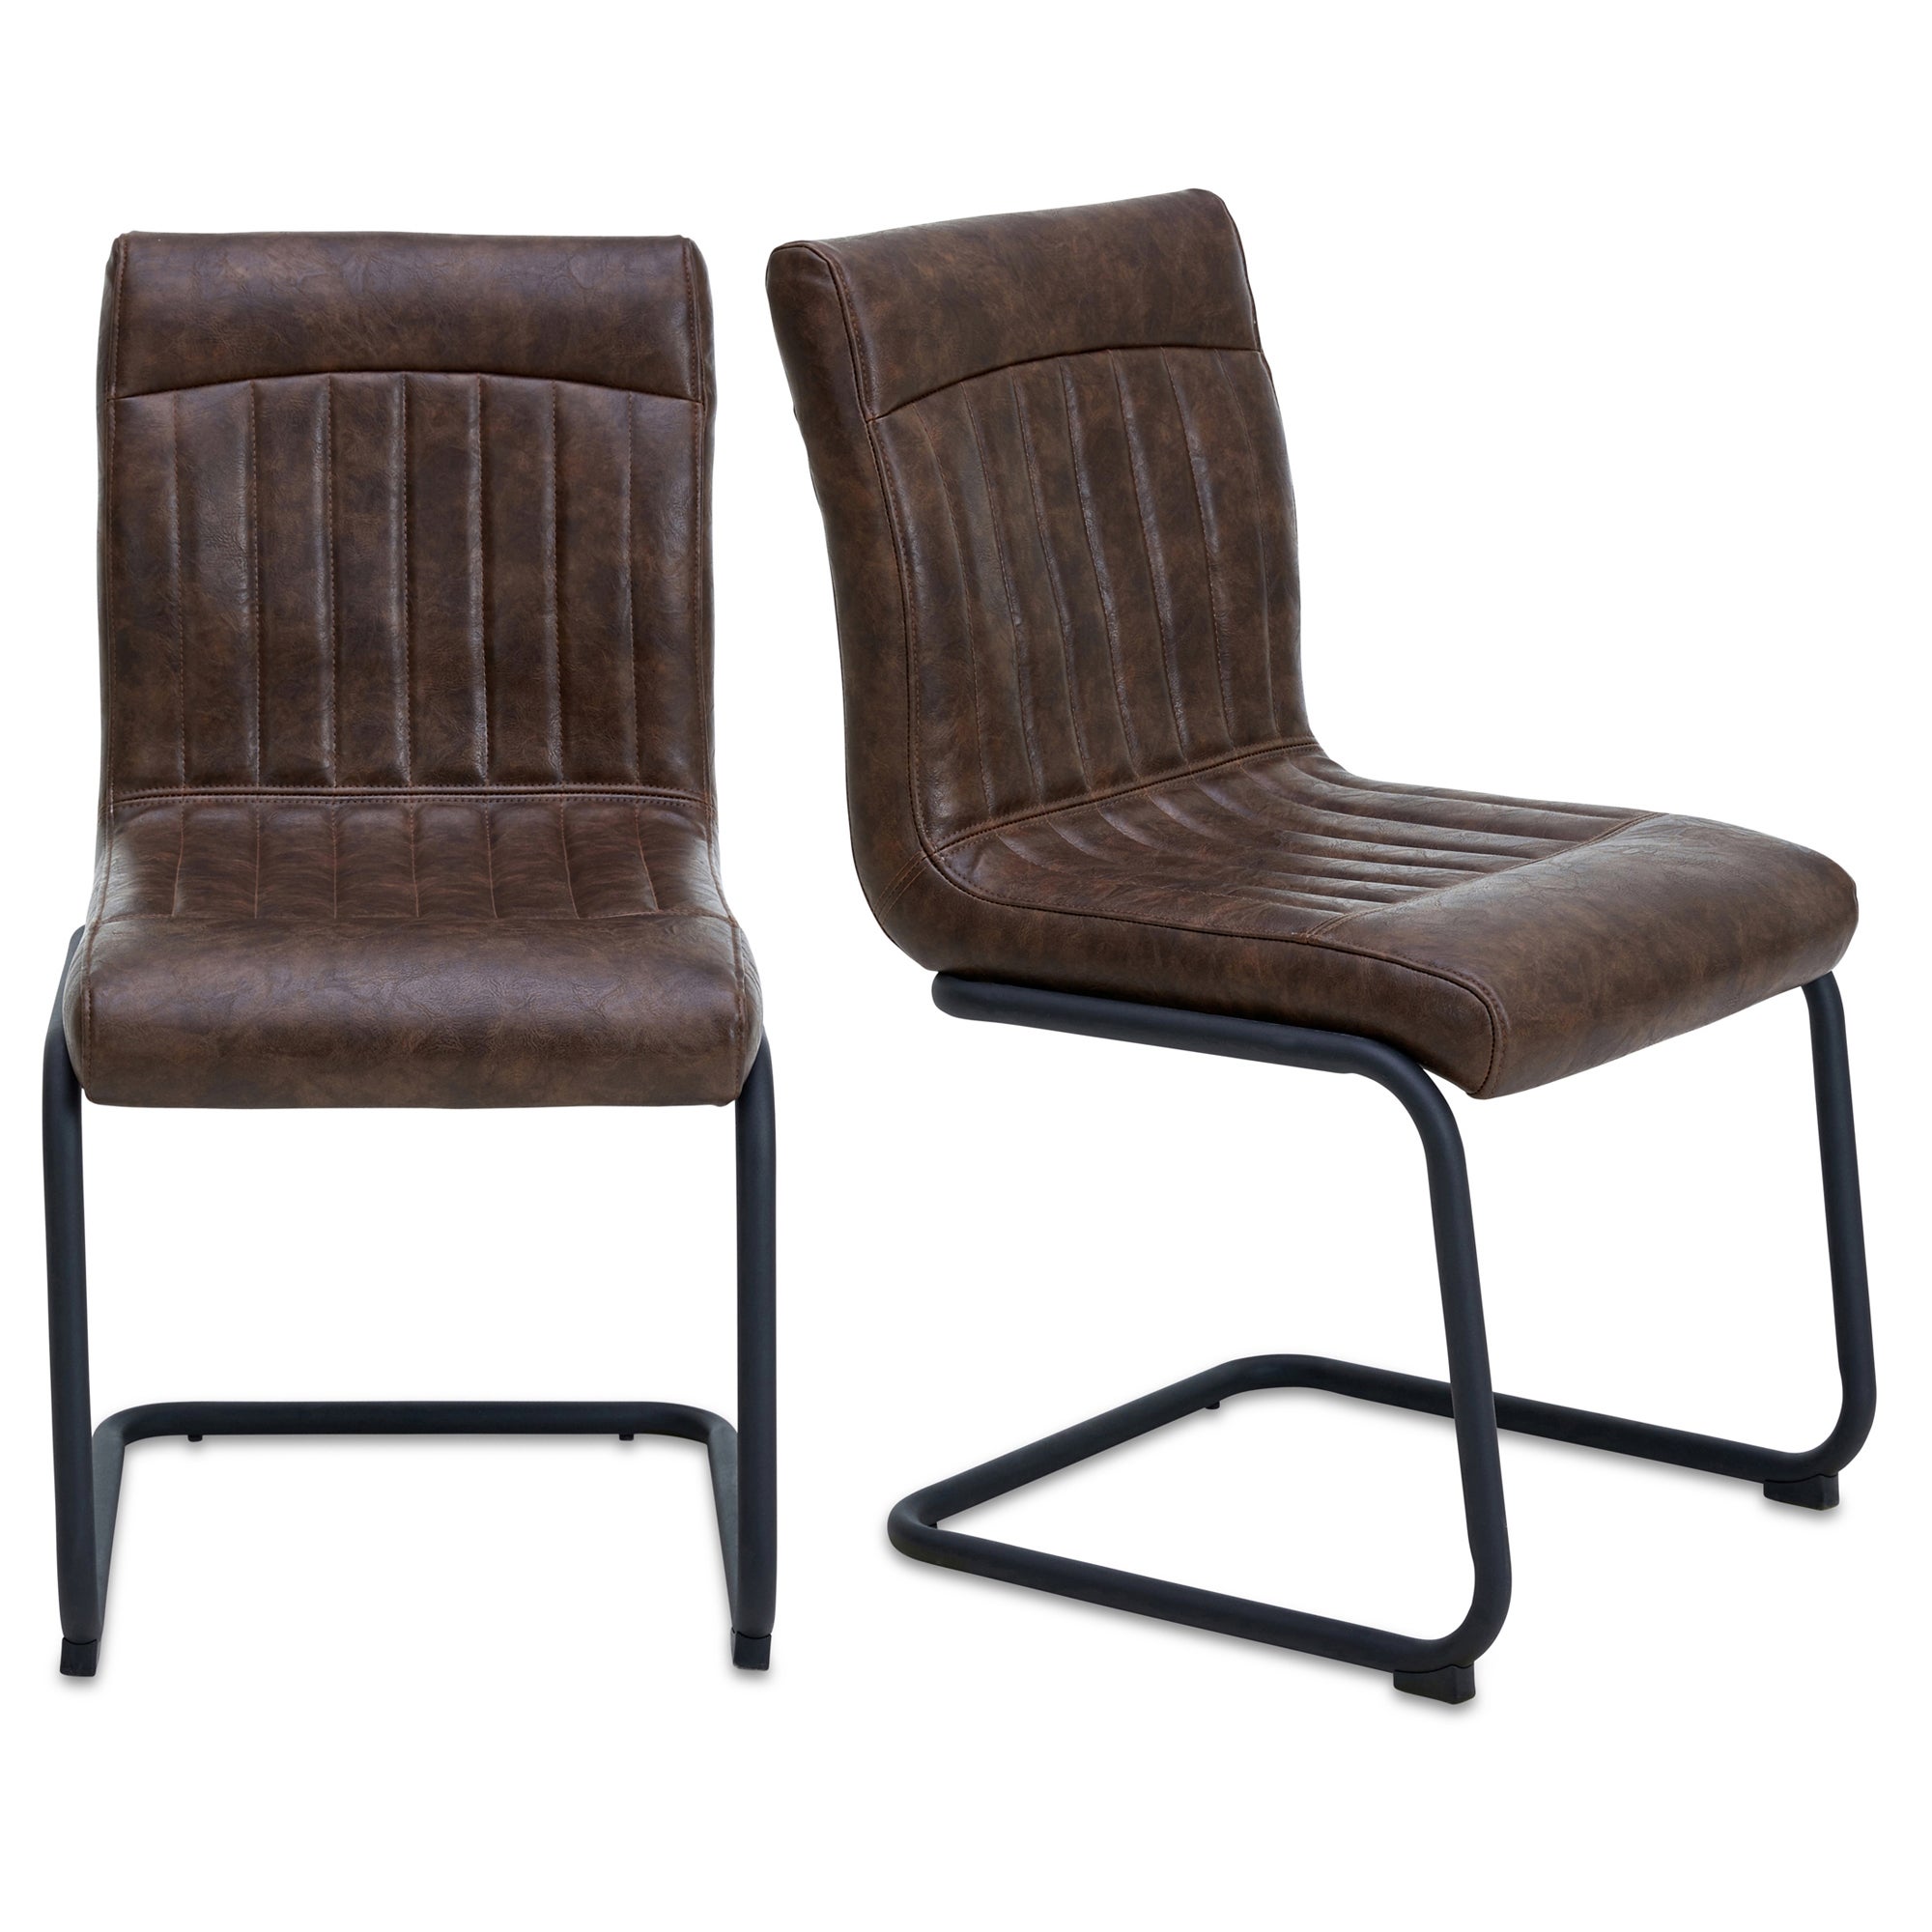 Set of 2 Felix Cantilever Dining Chairs, Faux Leather